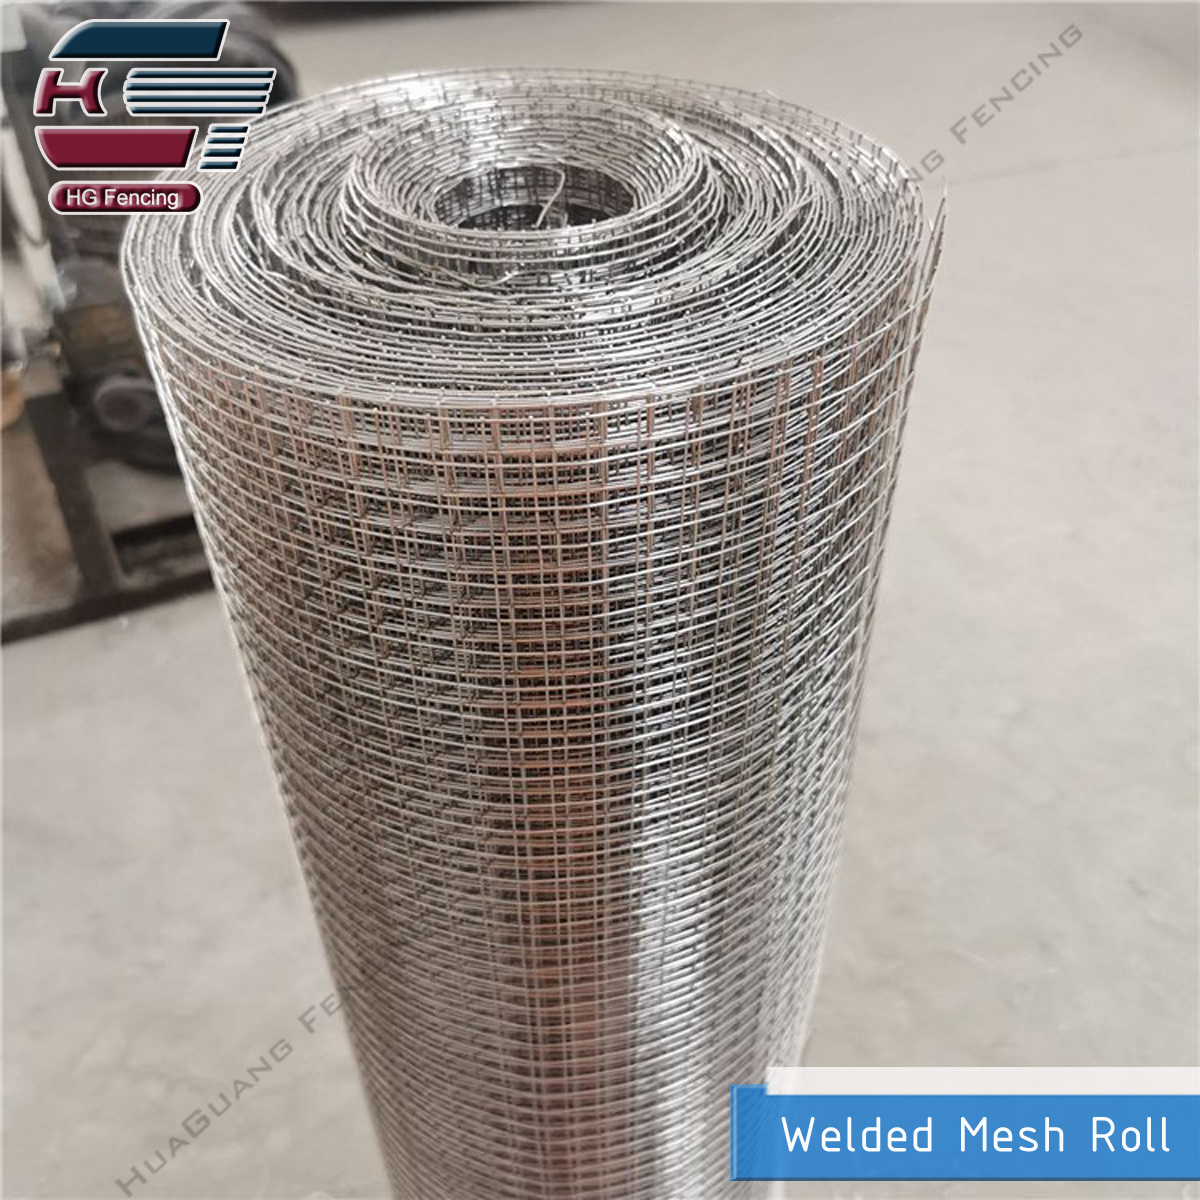 Application of galvanized welded wire mesh